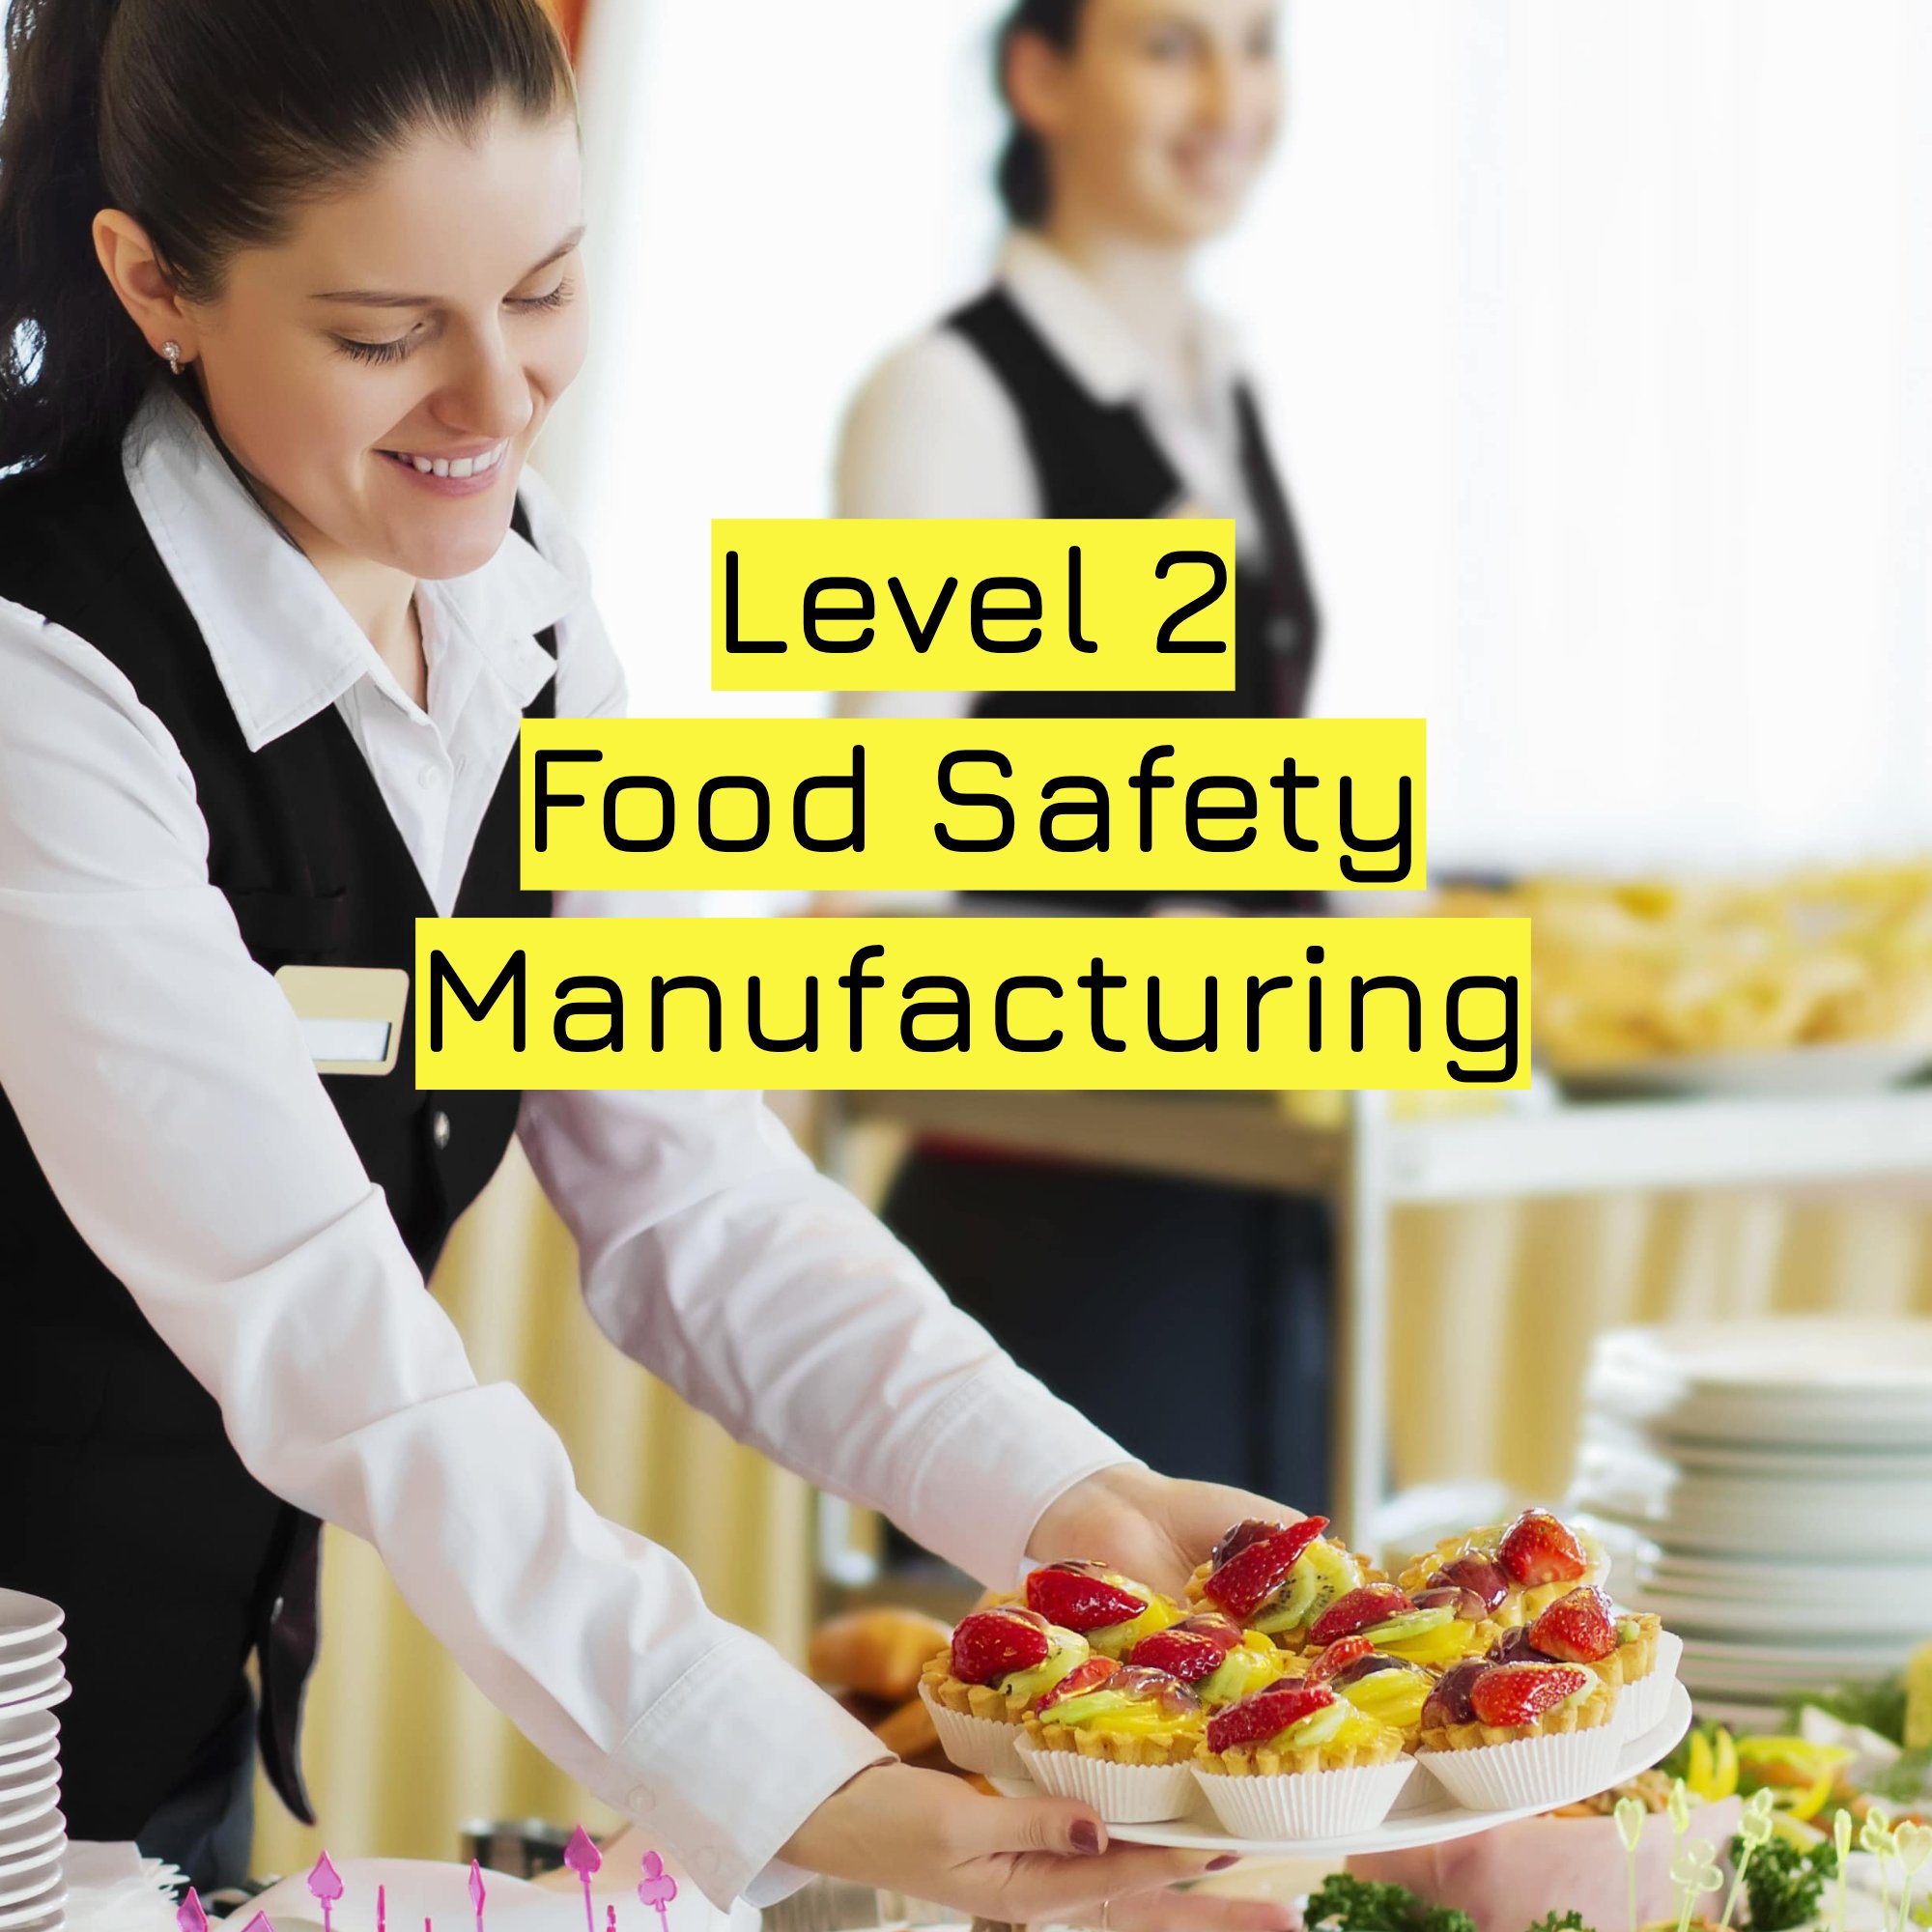 Level 2 Food Safety Manufacturing.jpg